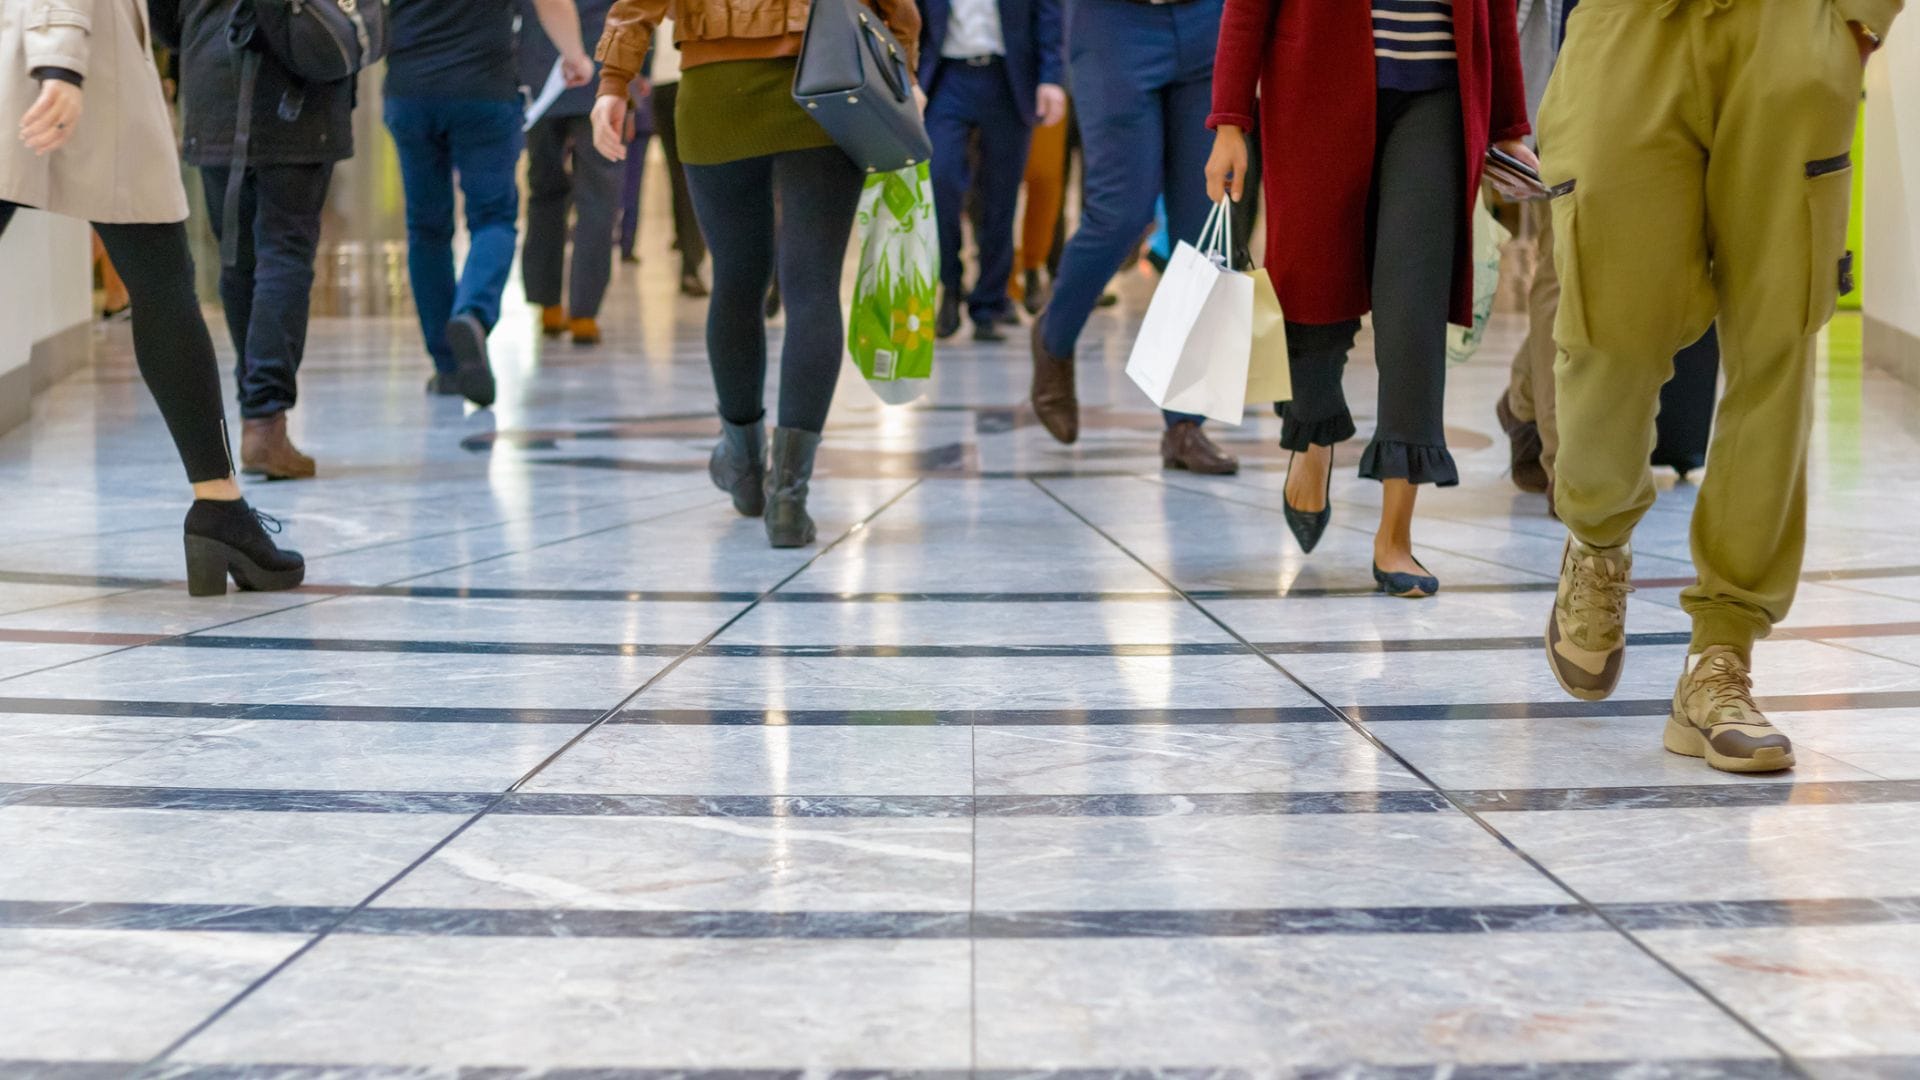 Foot traffic can be an important insight to evaluate and strategise on future marketing campaigns for retailers